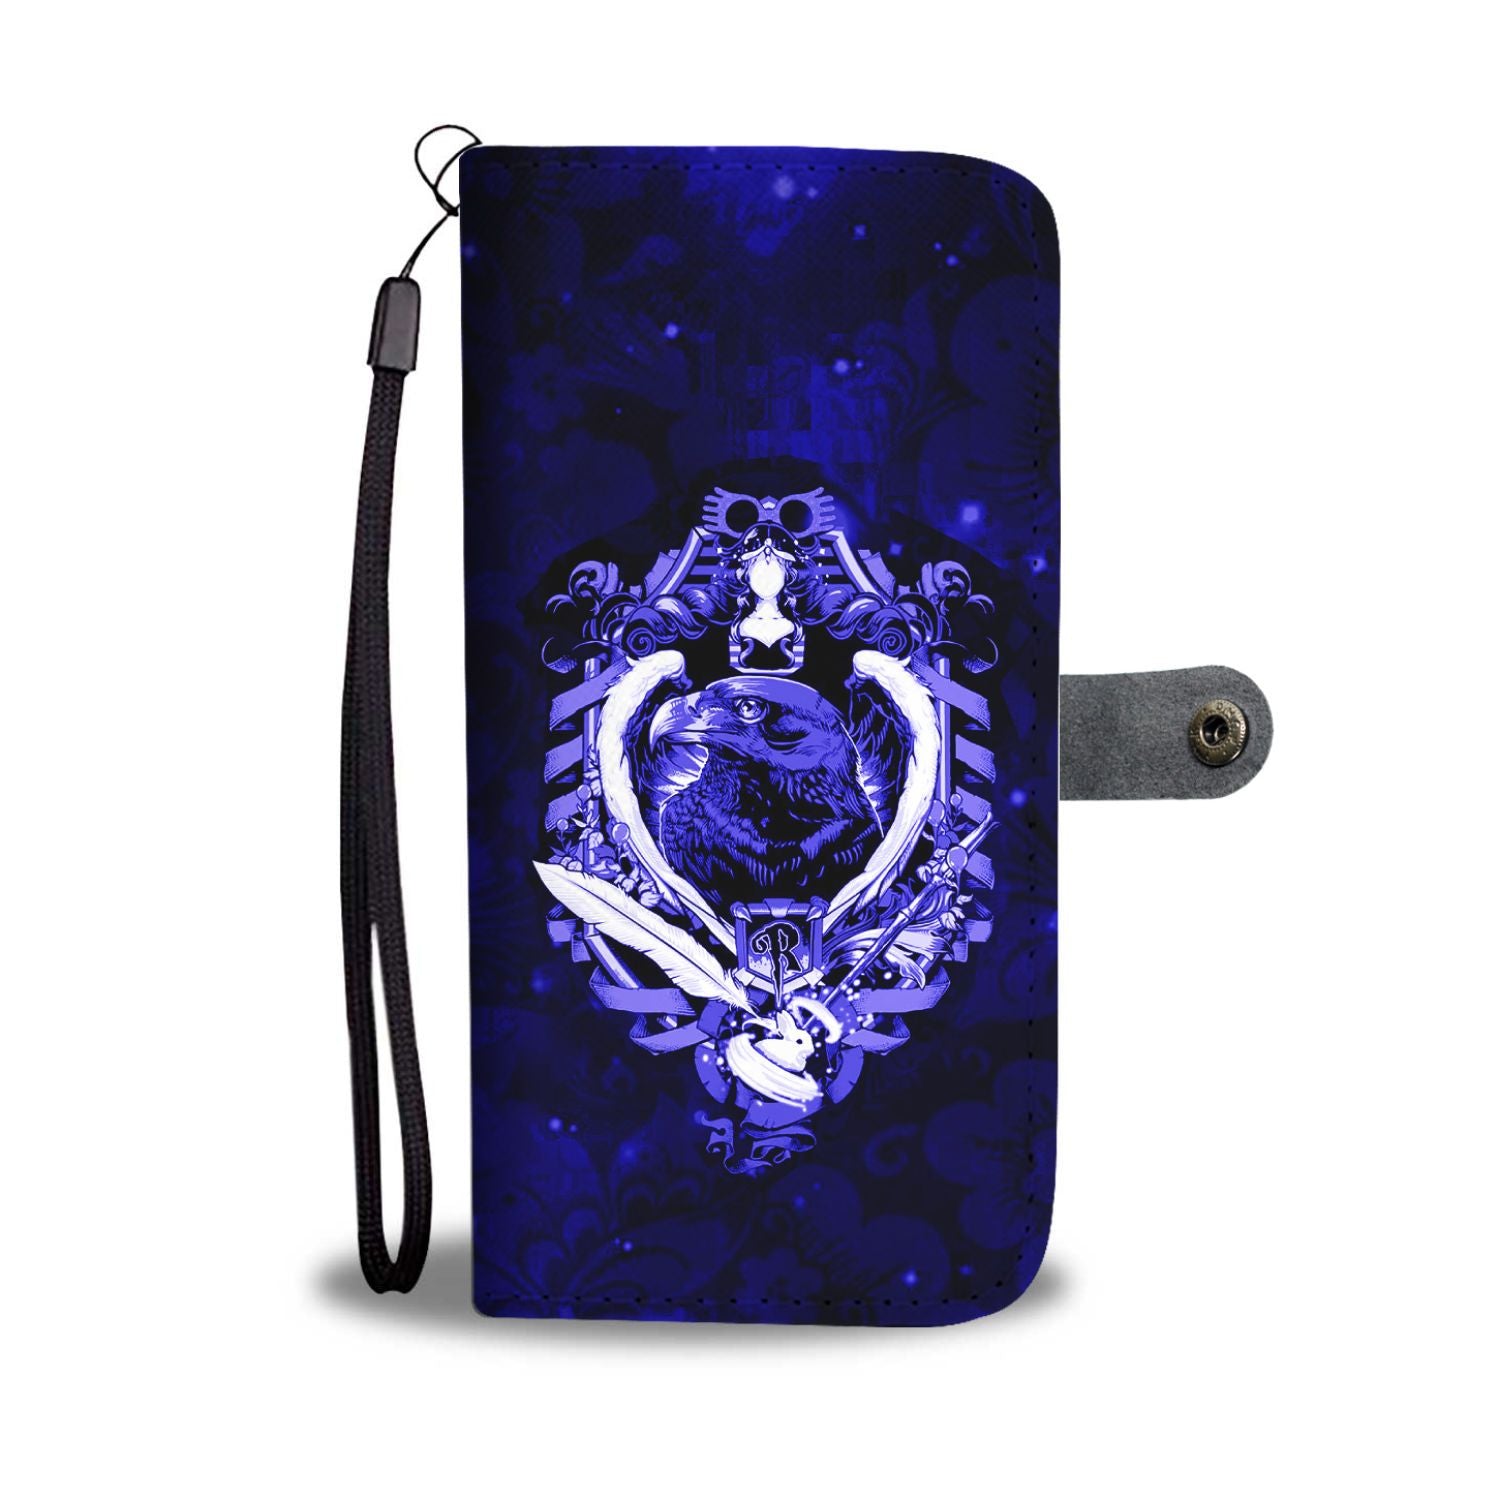 The Ravenclaw Eagle Harry Potter Version Galaxy 3D Wallet Case iPhone X / Xs  